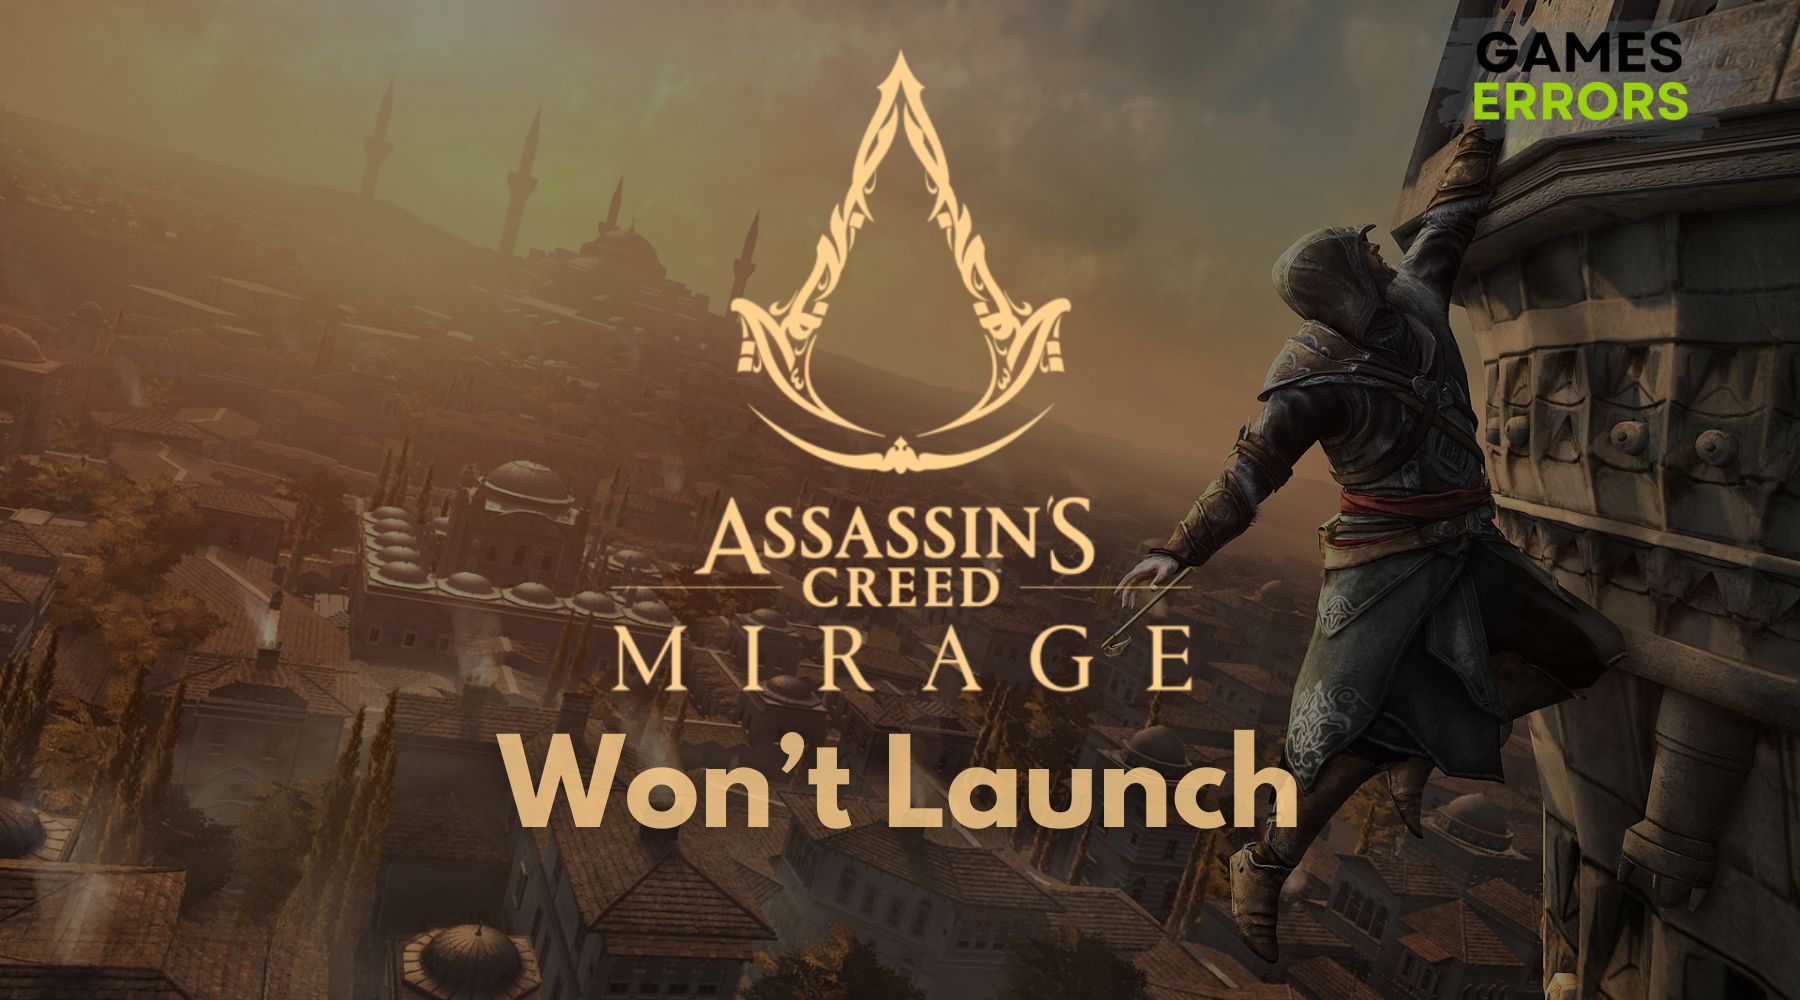 Assassin's Creed Mirage Won't Launch